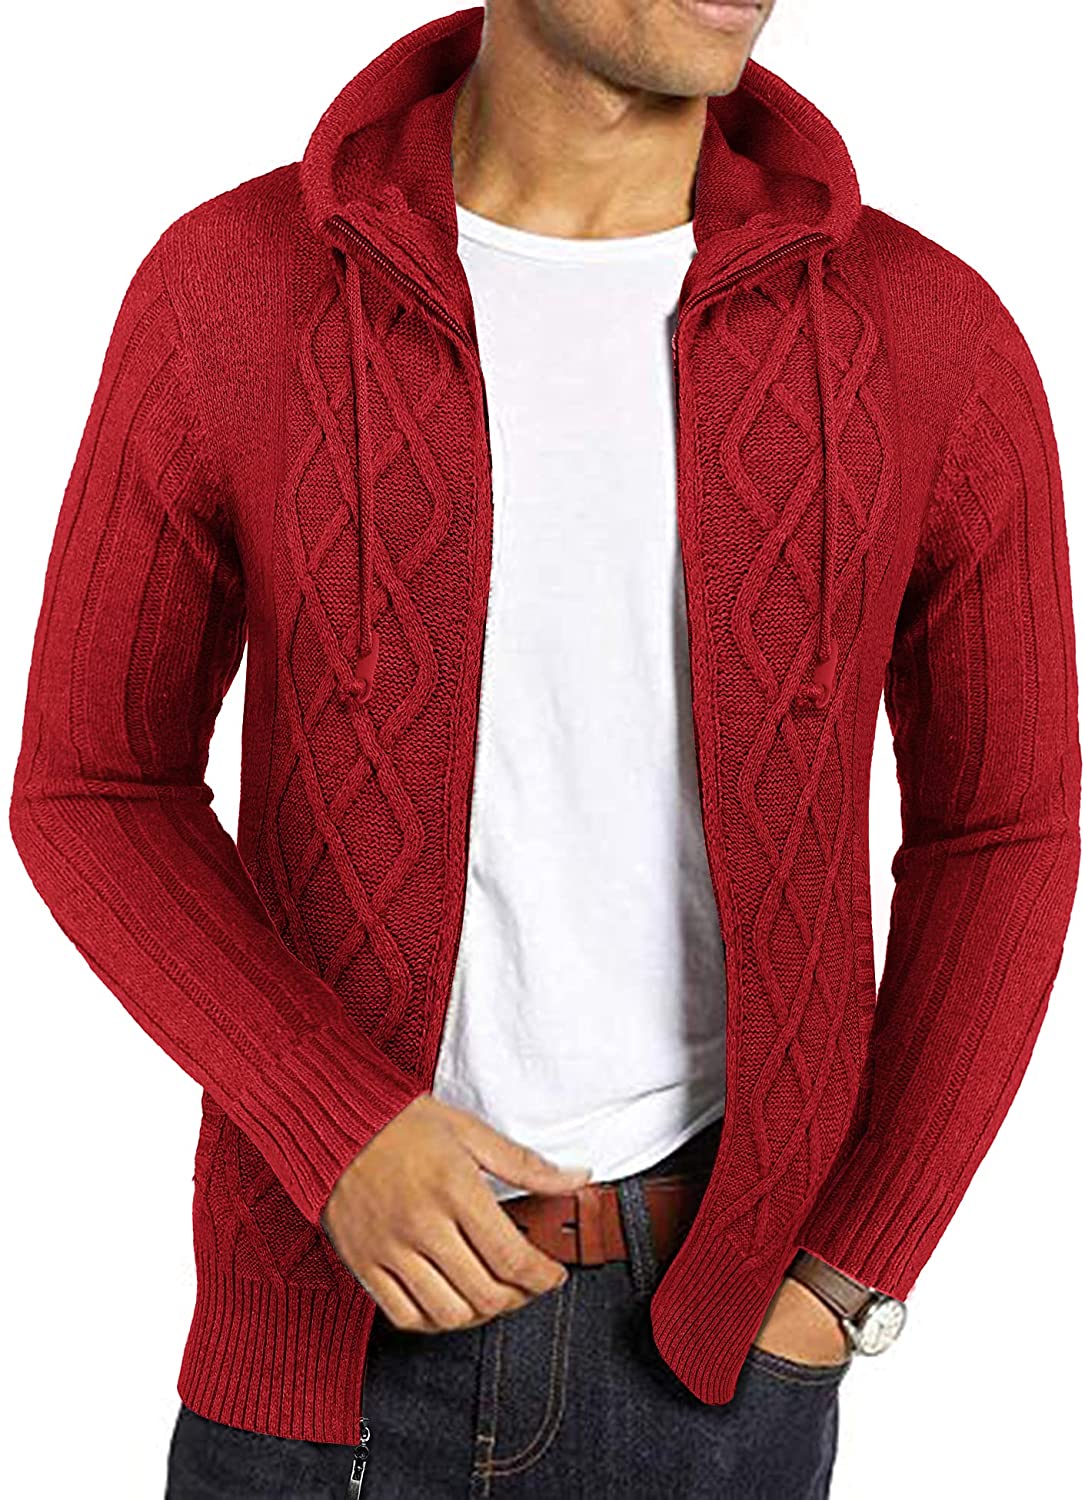 COOFANDY Men's Full Zip Cardigan Sweater Slim Fit Cable Knitted Zip Up Jumper with Pockets